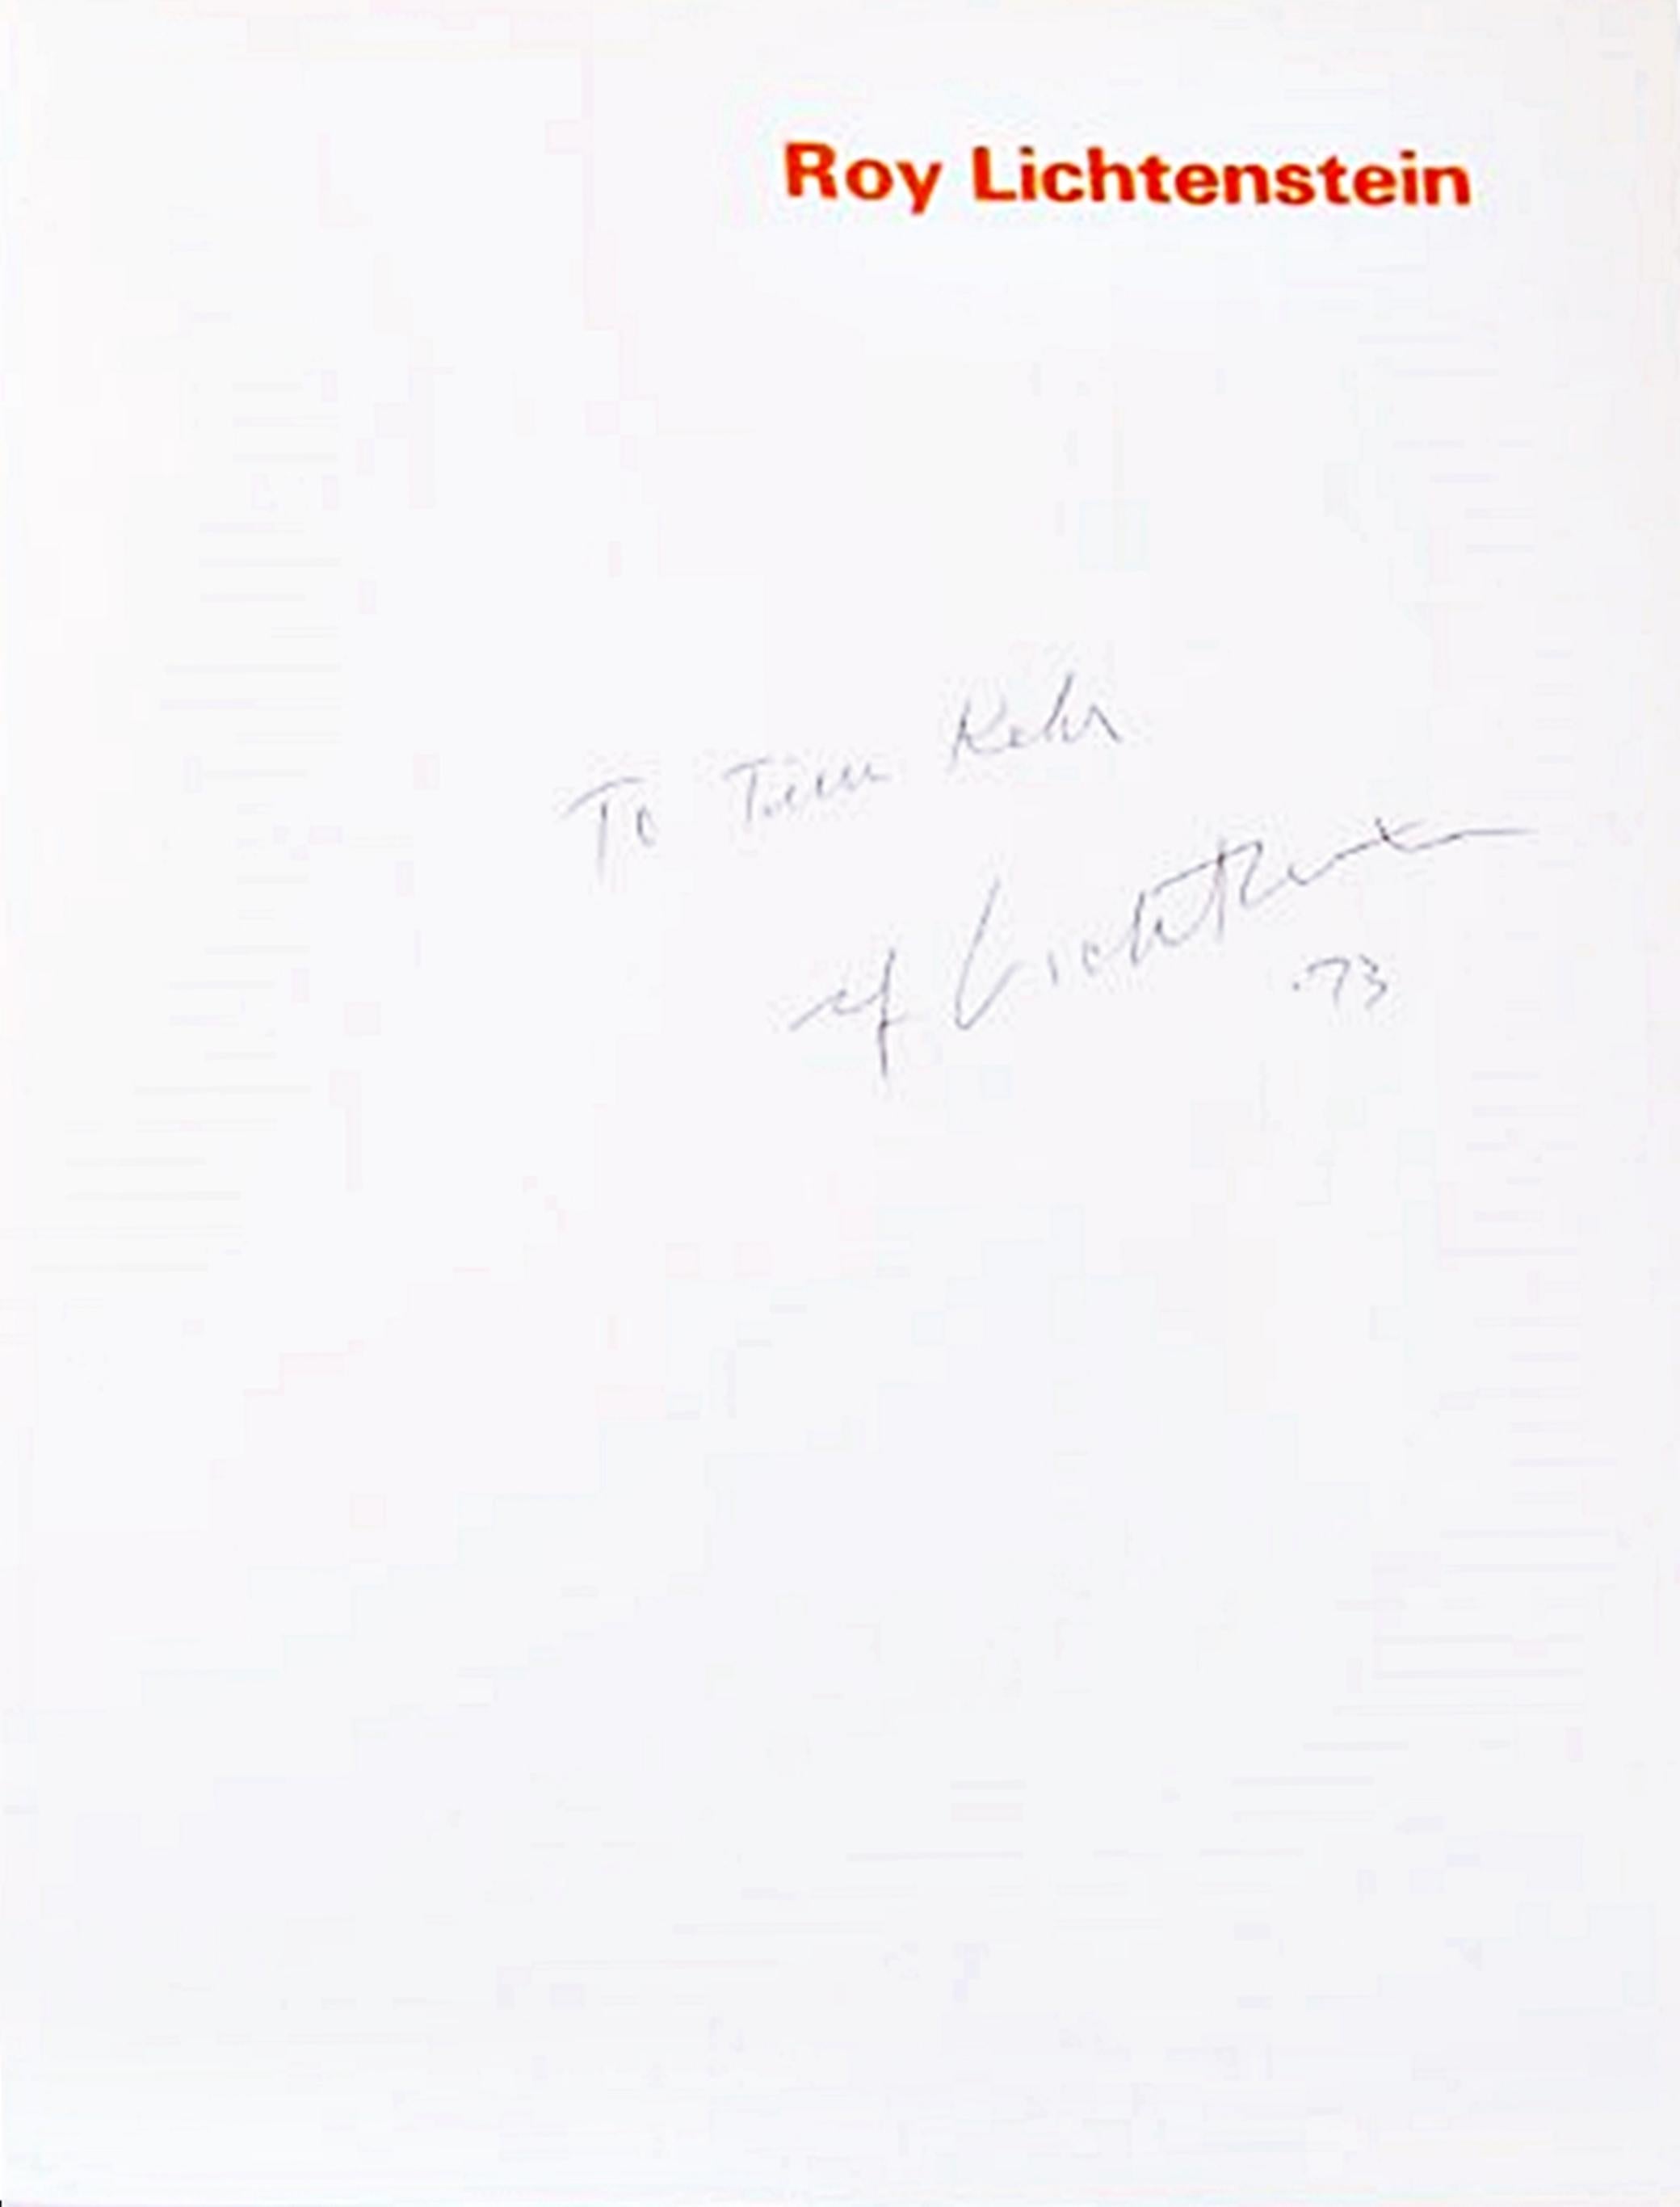 Roy Lichtenstein
Hardback monograph of drawings and prints hand signed and inscribed by artist, 1973
Hardback Monograph. 
Hand signed, inscribed and dated by artist. Inscription reads as follows: To Tim Kehr Roy Lichtenstein
12 1/2 × 9 3/4 × 1 1/4